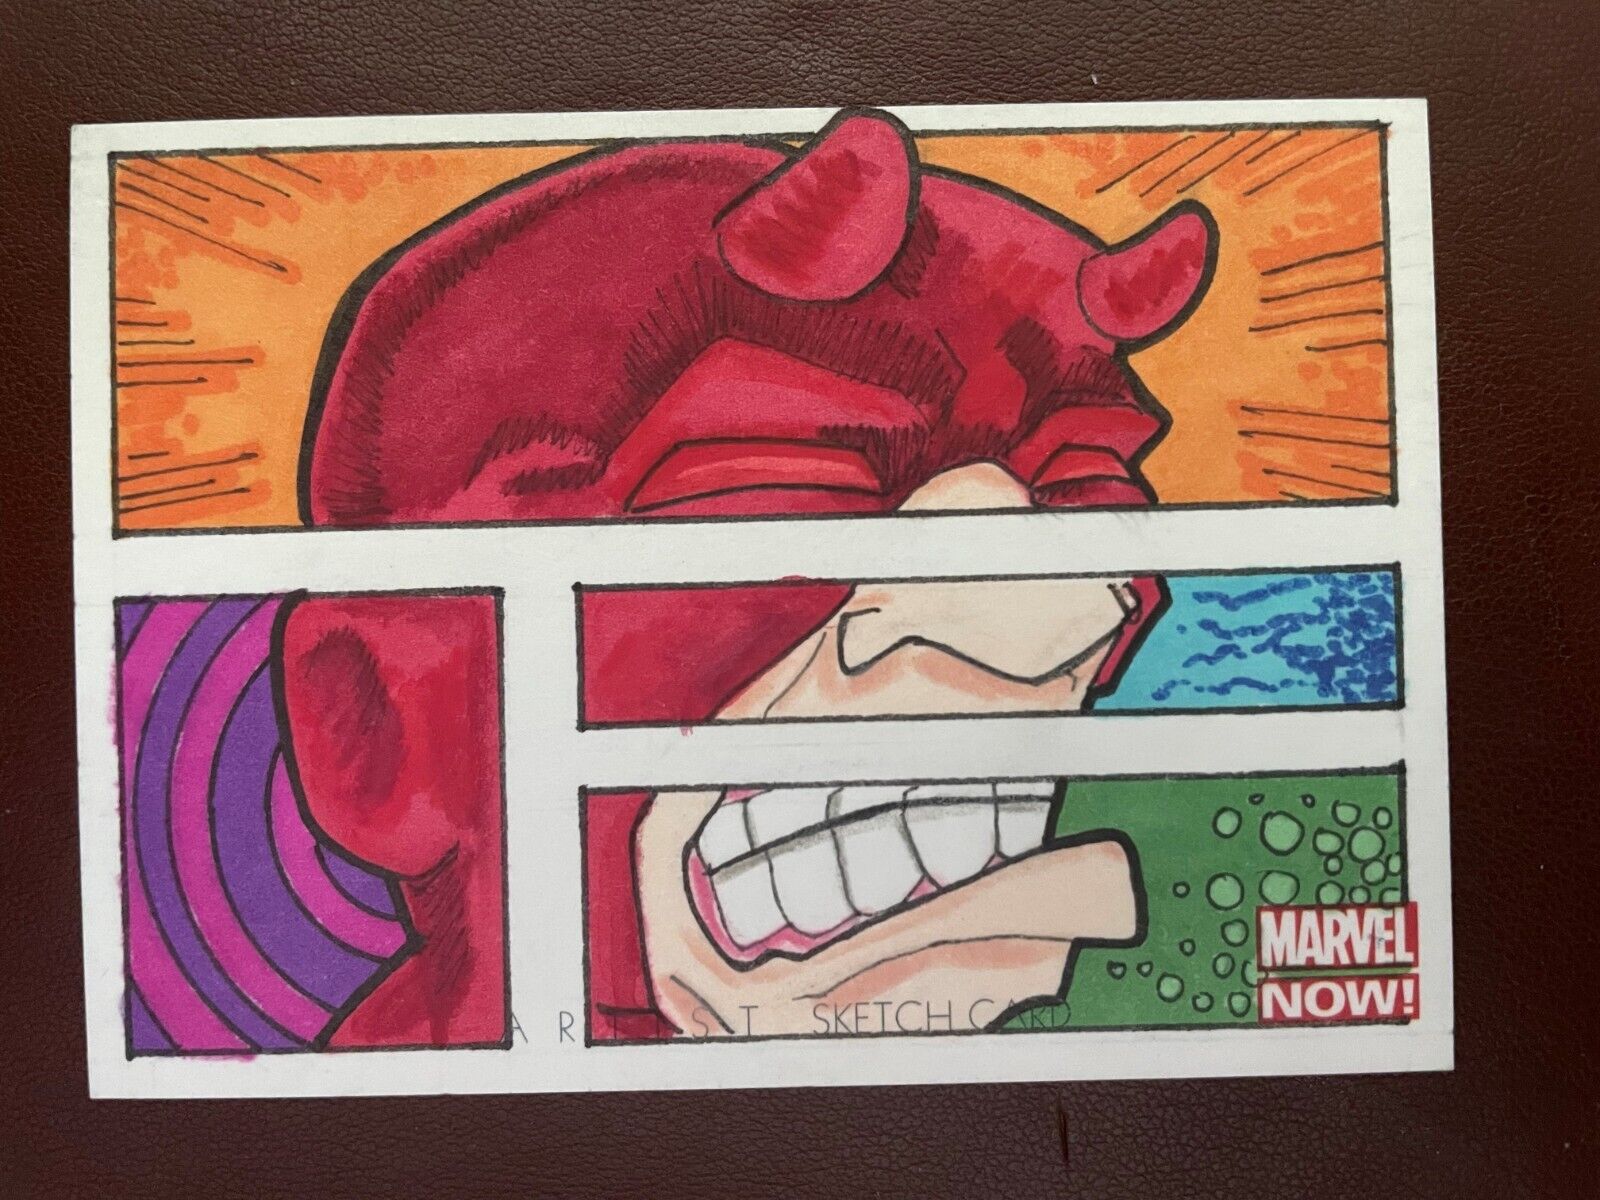 2013 Marvel Now 1/1 Colored Daredevil Sketch Card by J(ay) Tracy re:Chris Samnee